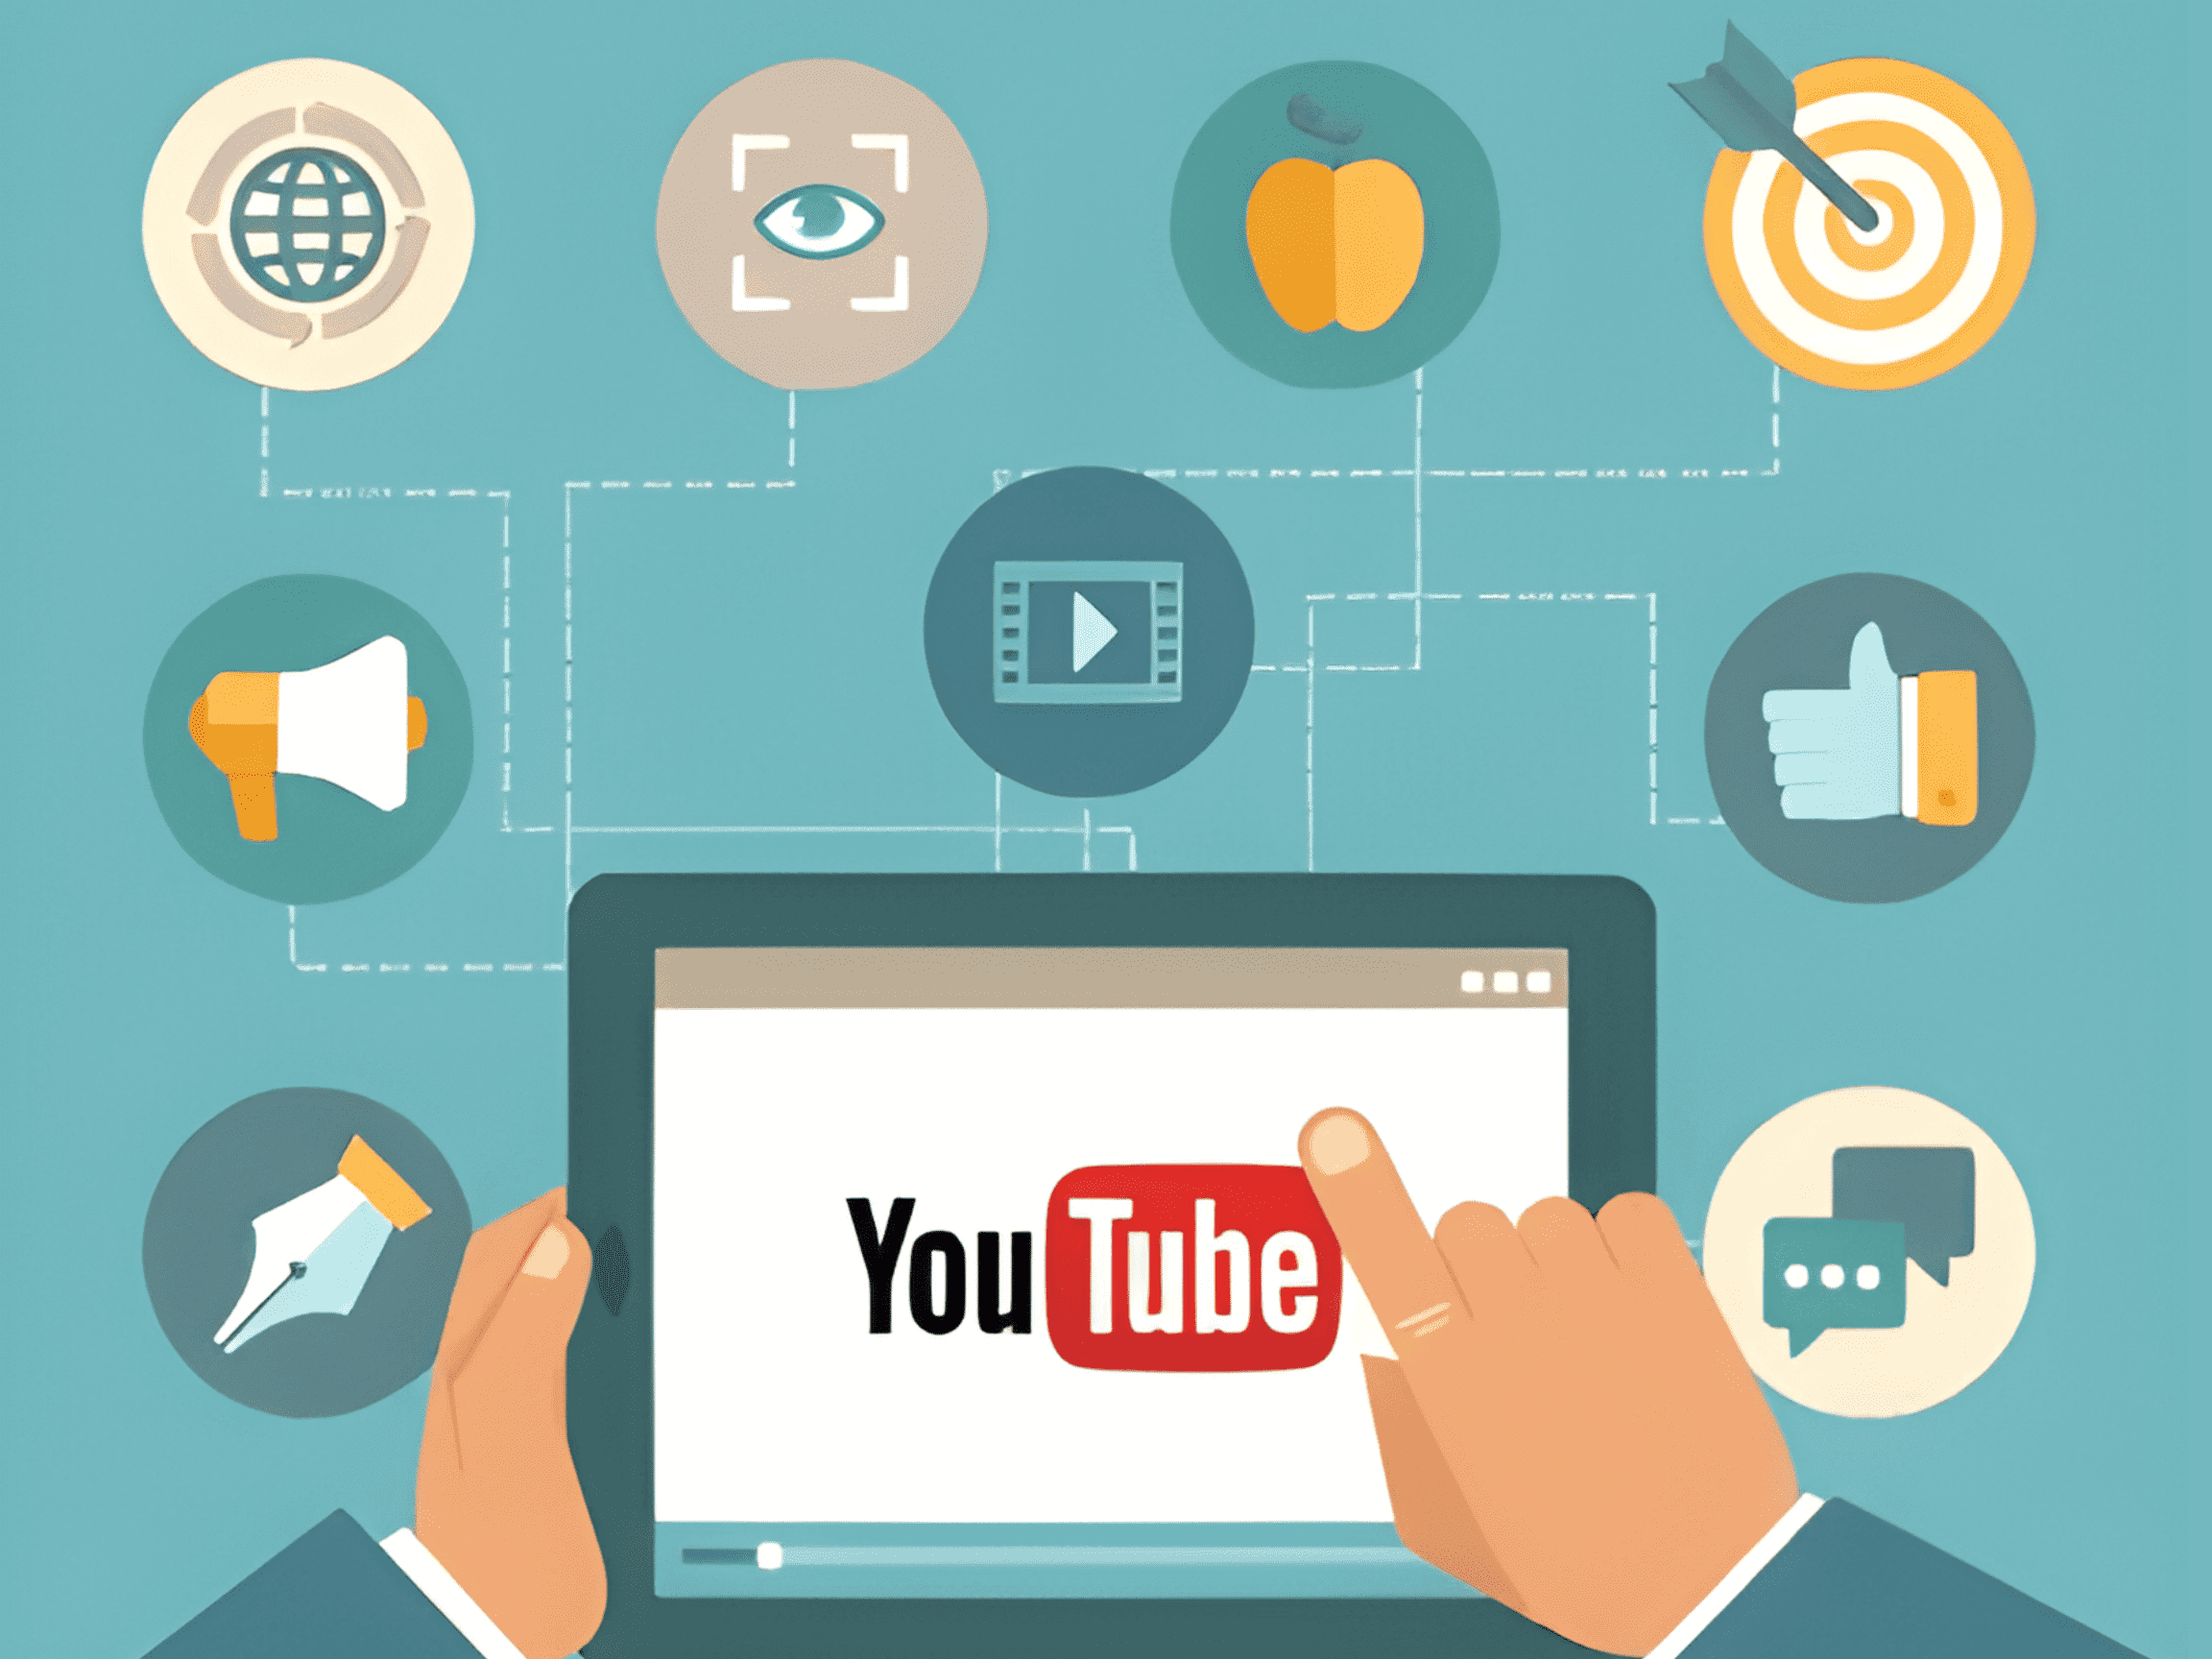 Read Great Video Content Ideas for Your School's YouTube Channel